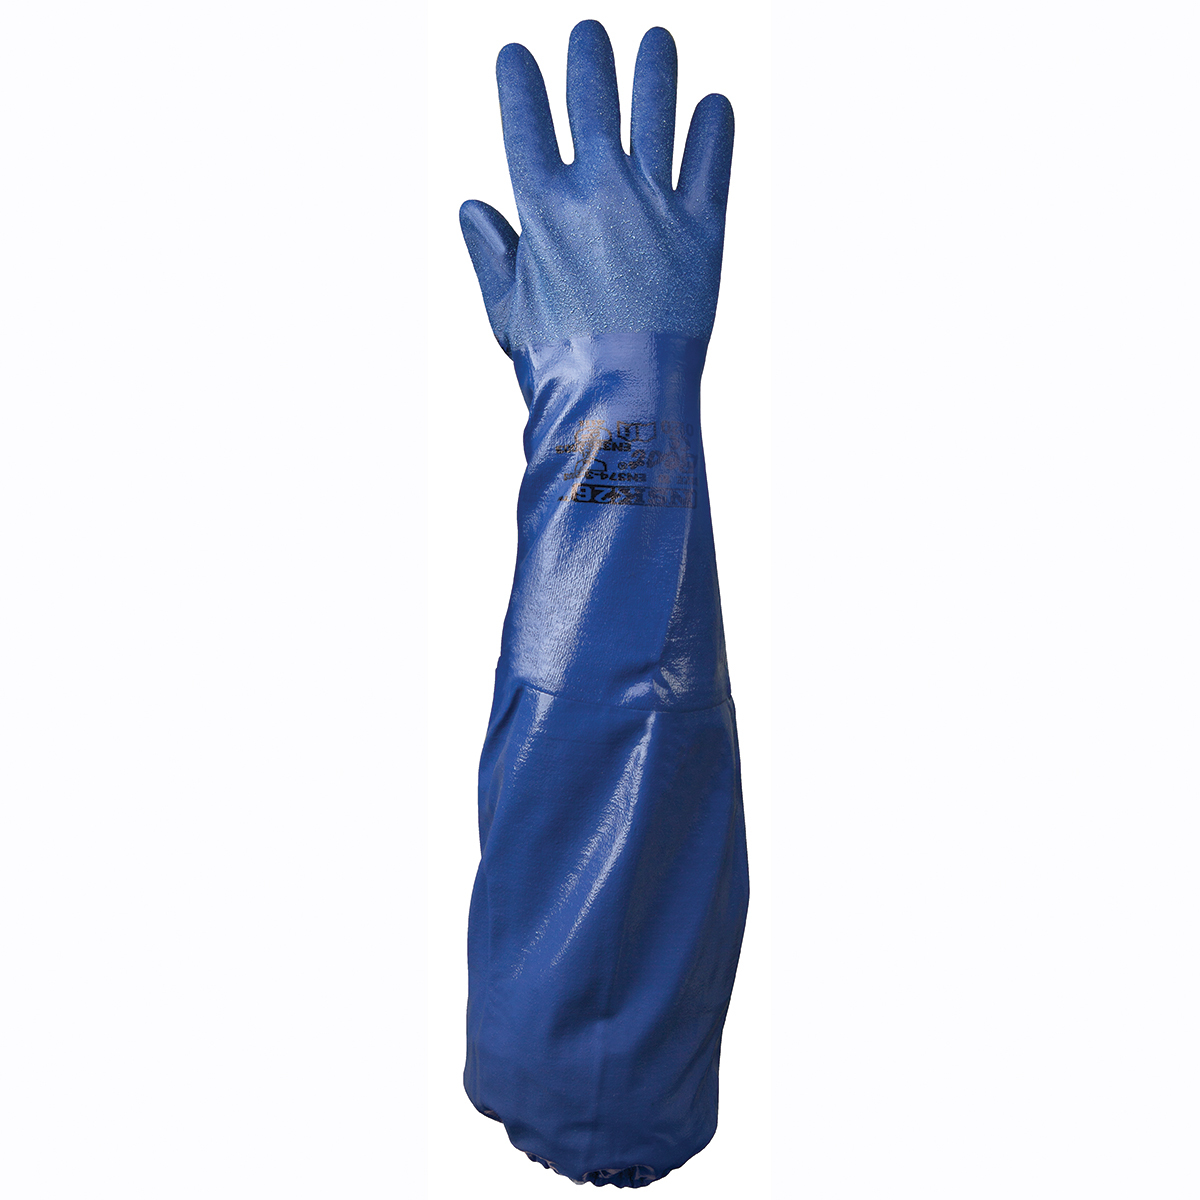 SHOWA® Size 8 Blue Cotton Lined Nitrile Chemical Resistant Gloves